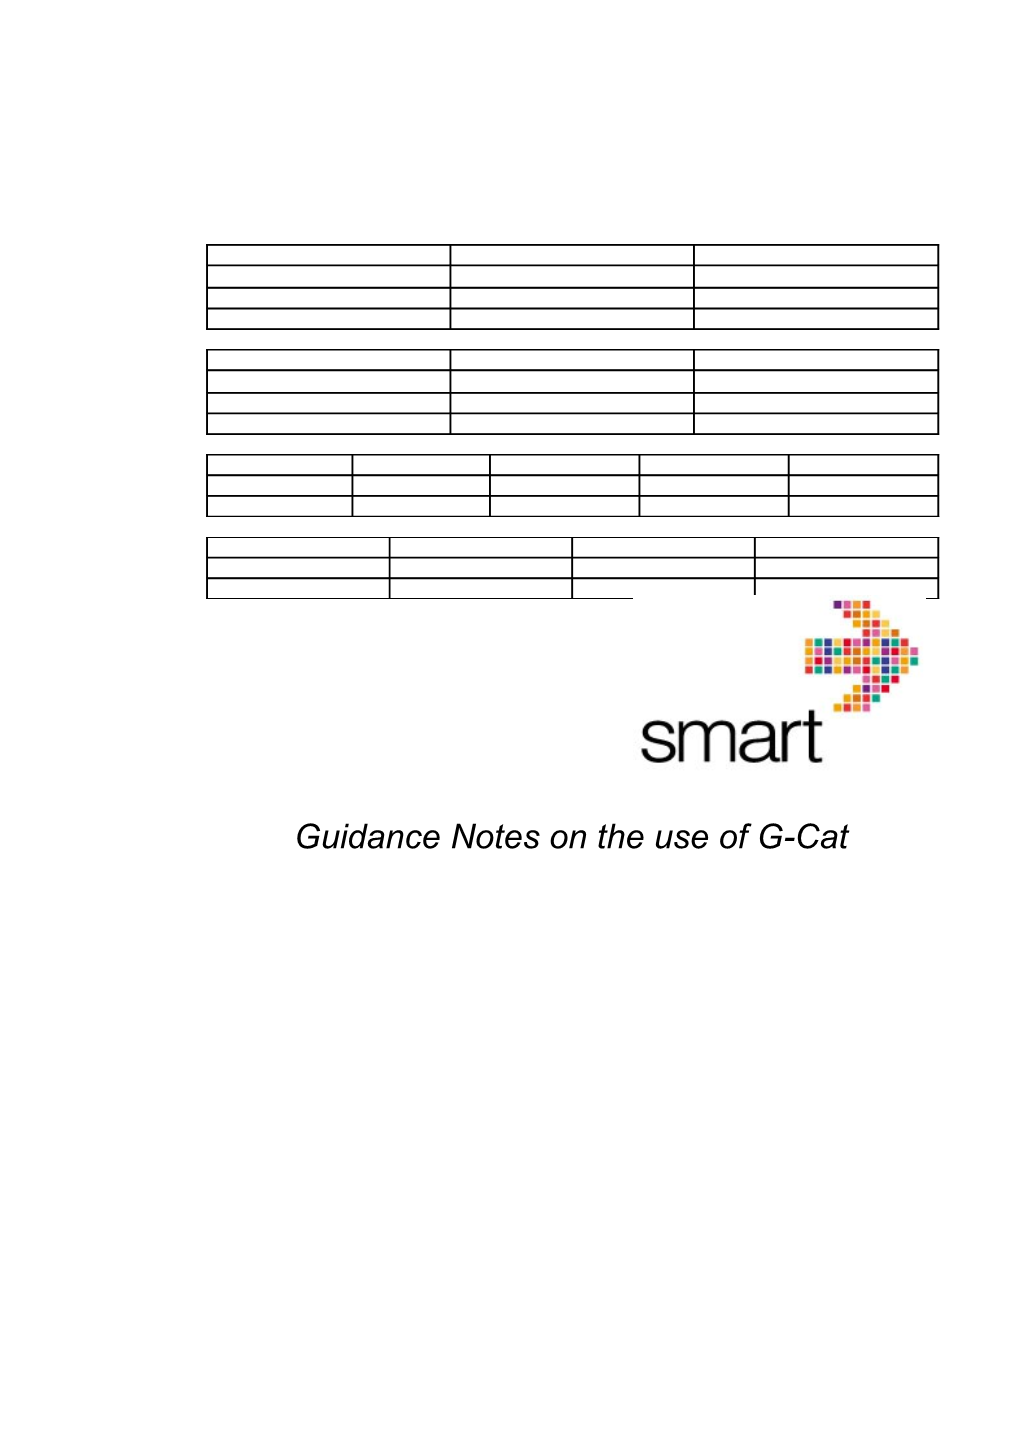 Document (Project) Title: WP4 03 Guidance Notes on the Use of G-Cat